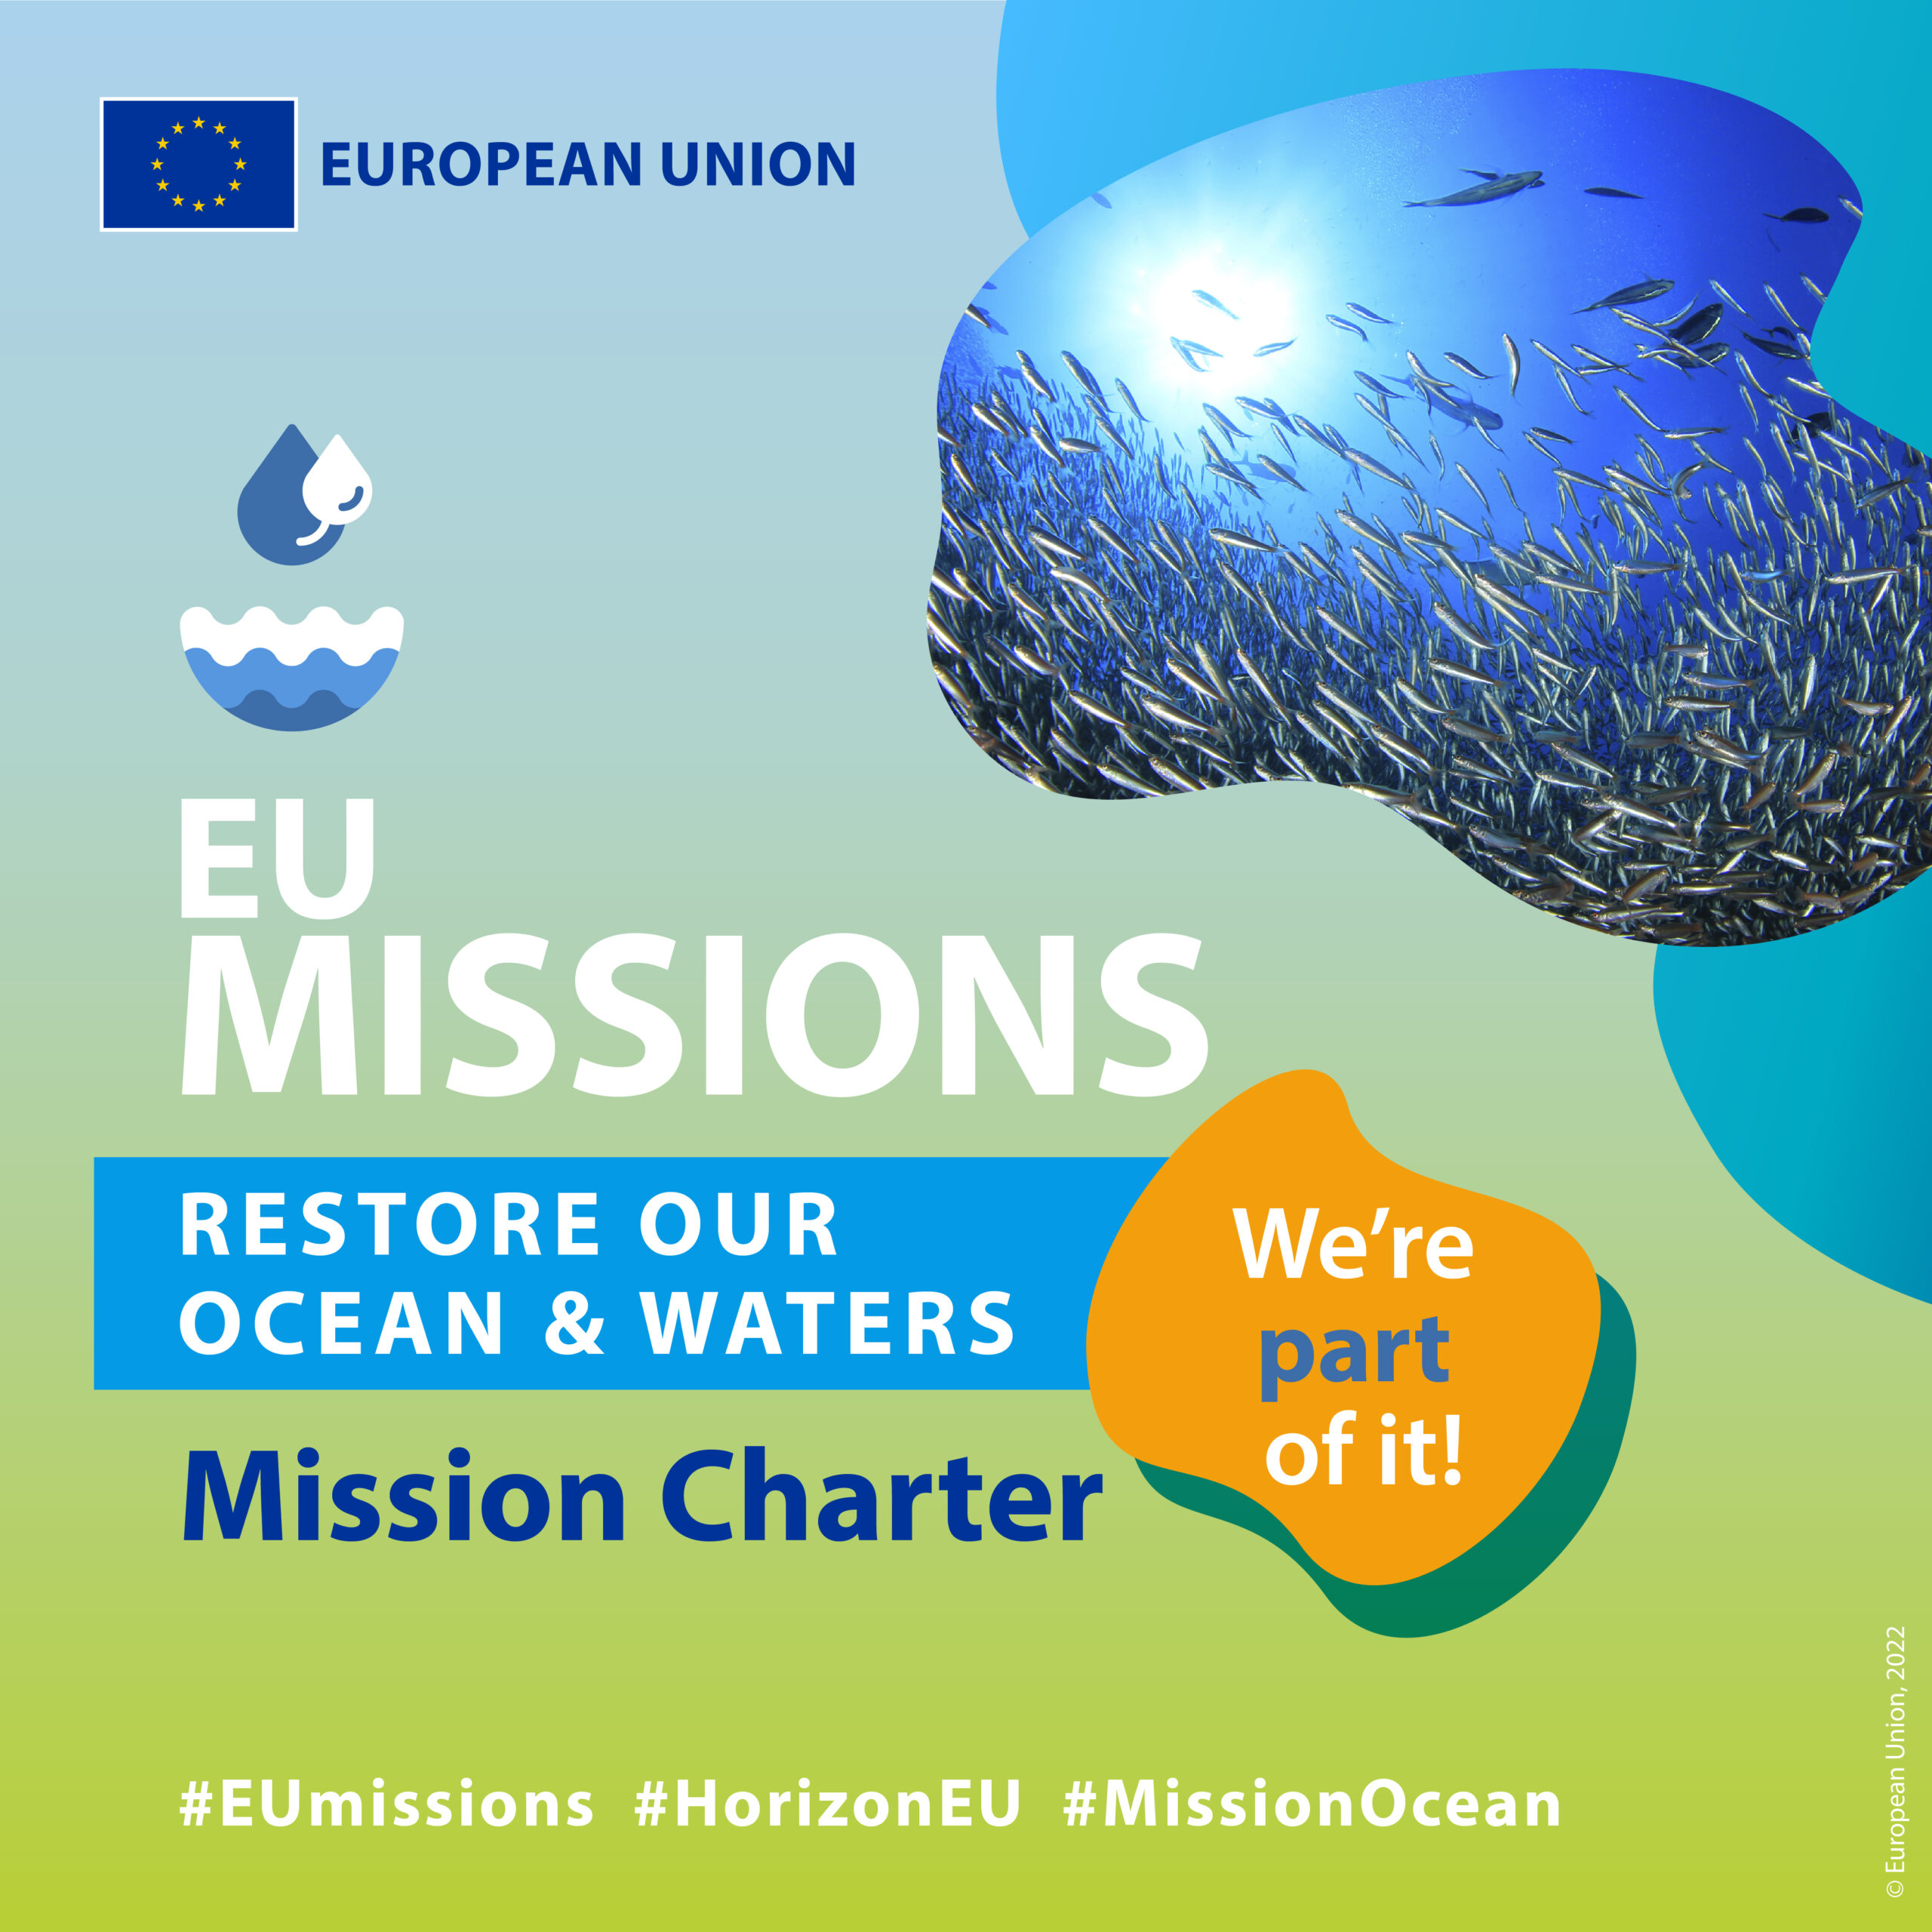 Venice Lagoon Plastic Free Joins the EU Mission “Restore our Ocean and Waters”